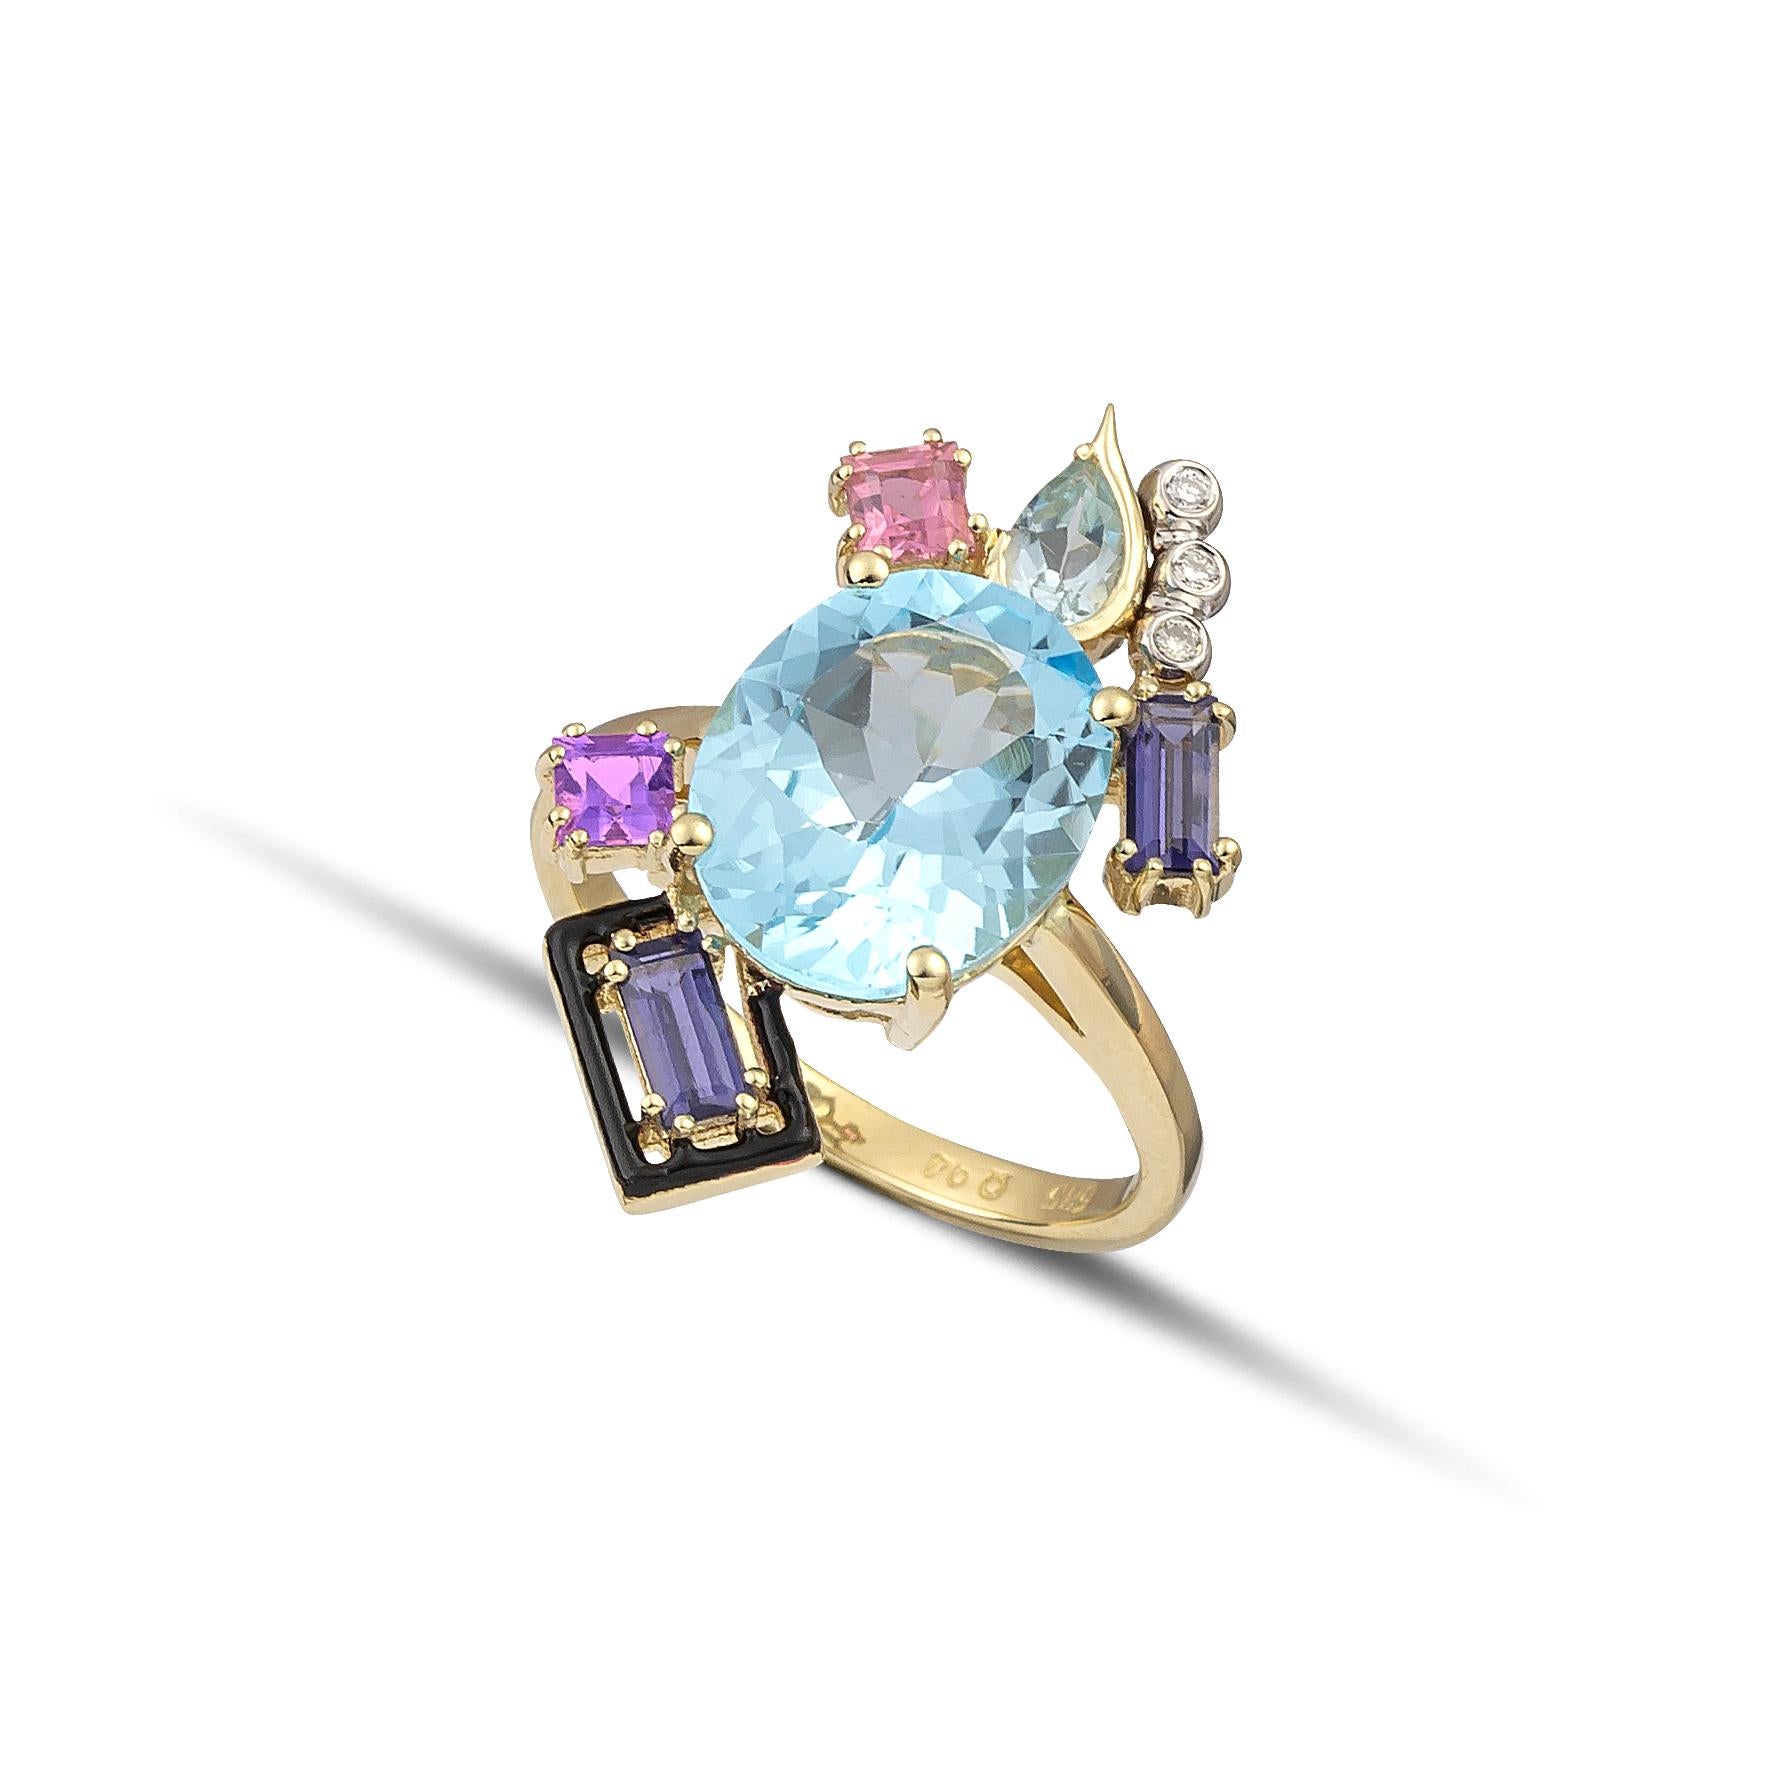 100% Recycled  14 K Yellow Gold, One Oval Blue Topaz 10x12mm, Two iolites, One pear-cut blue topaz, One amethyst, One tourmaline, Three Diamonds, Black enamel

Like a work of fine art, this ring surprisingly combines all shades and tones of blue and